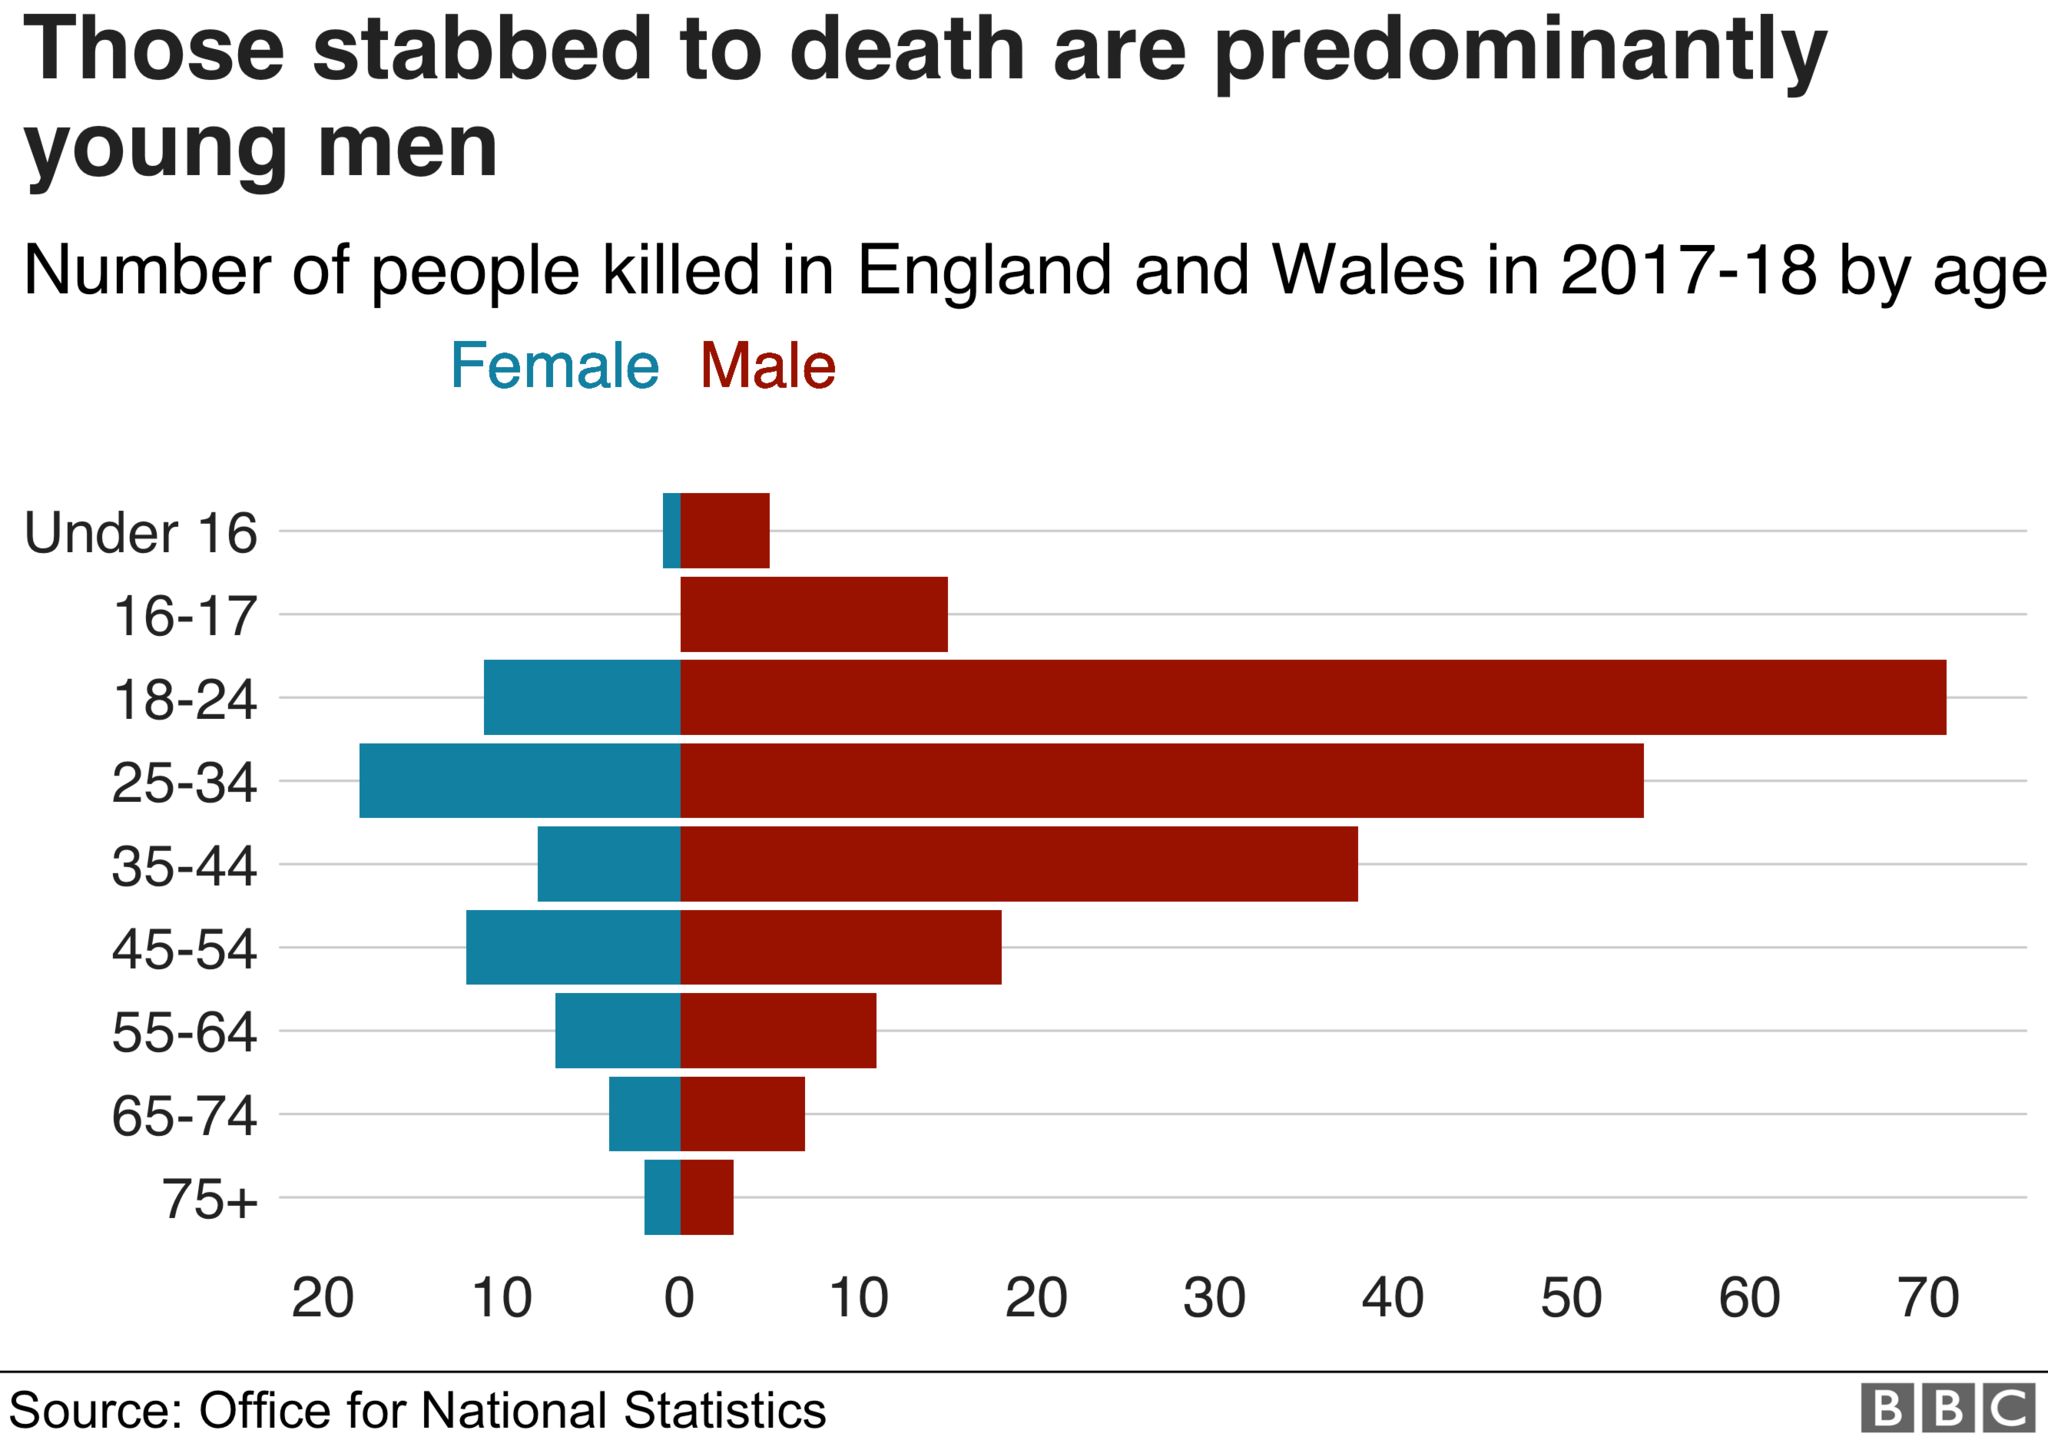 Most people who were stabbed were young men